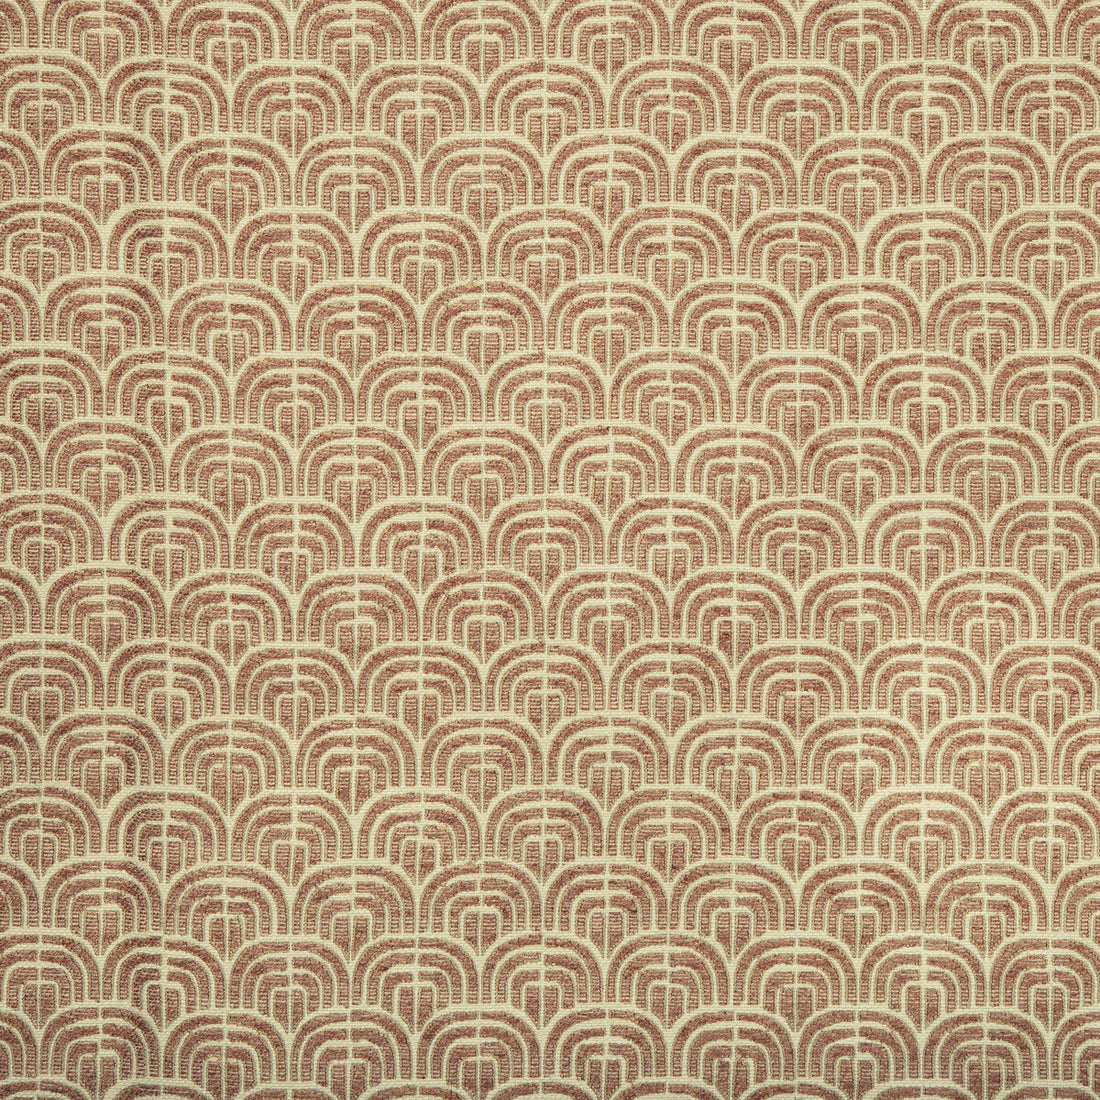 Bale fabric in radicchio color - pattern 2019155.710.0 - by Lee Jofa in the Carrier And Company collection